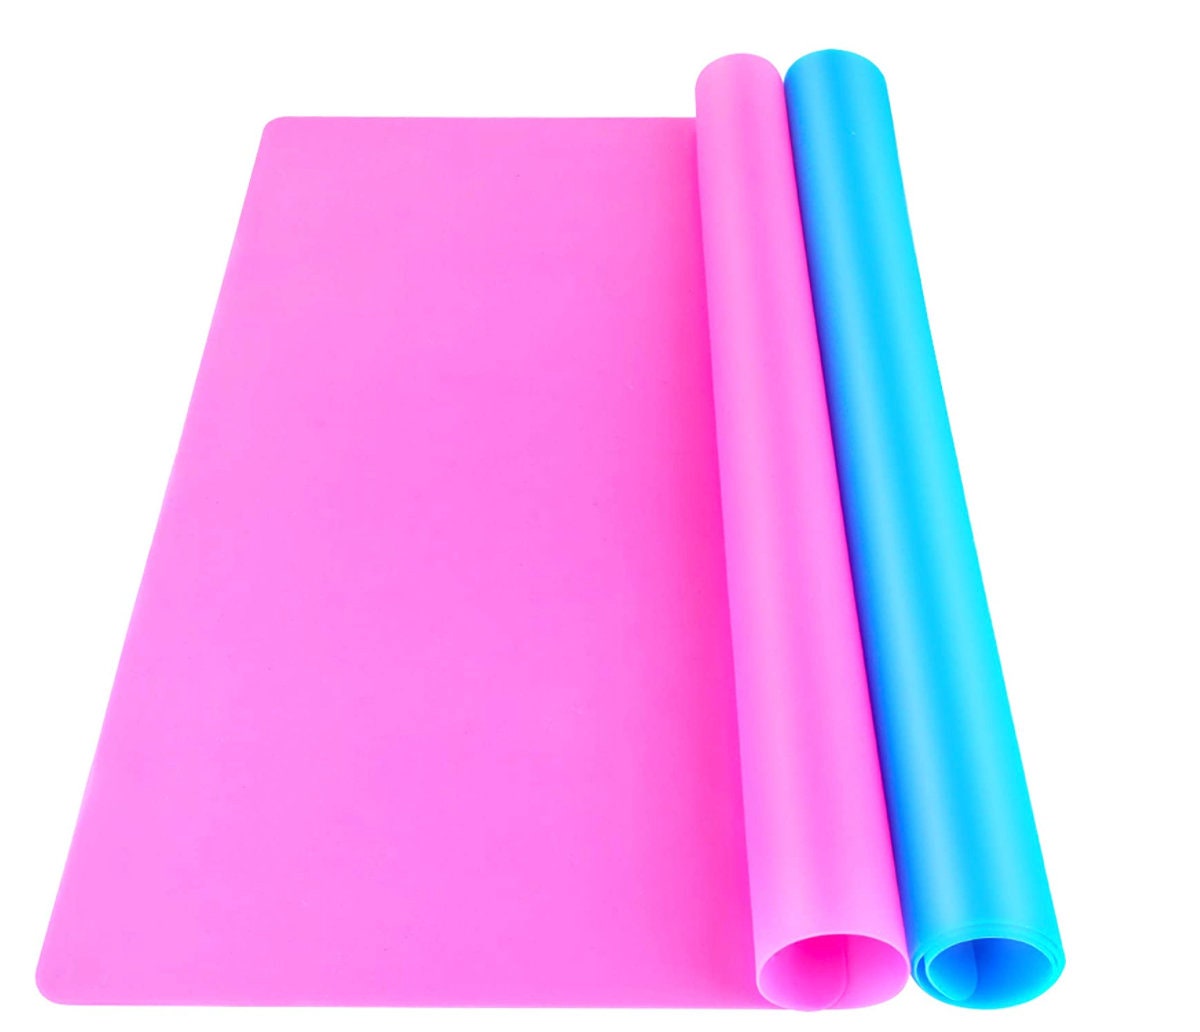 3 Pack Large Silicone Sheets for Crafts, Liquid, Resin Jewelry Casting Molds Mat